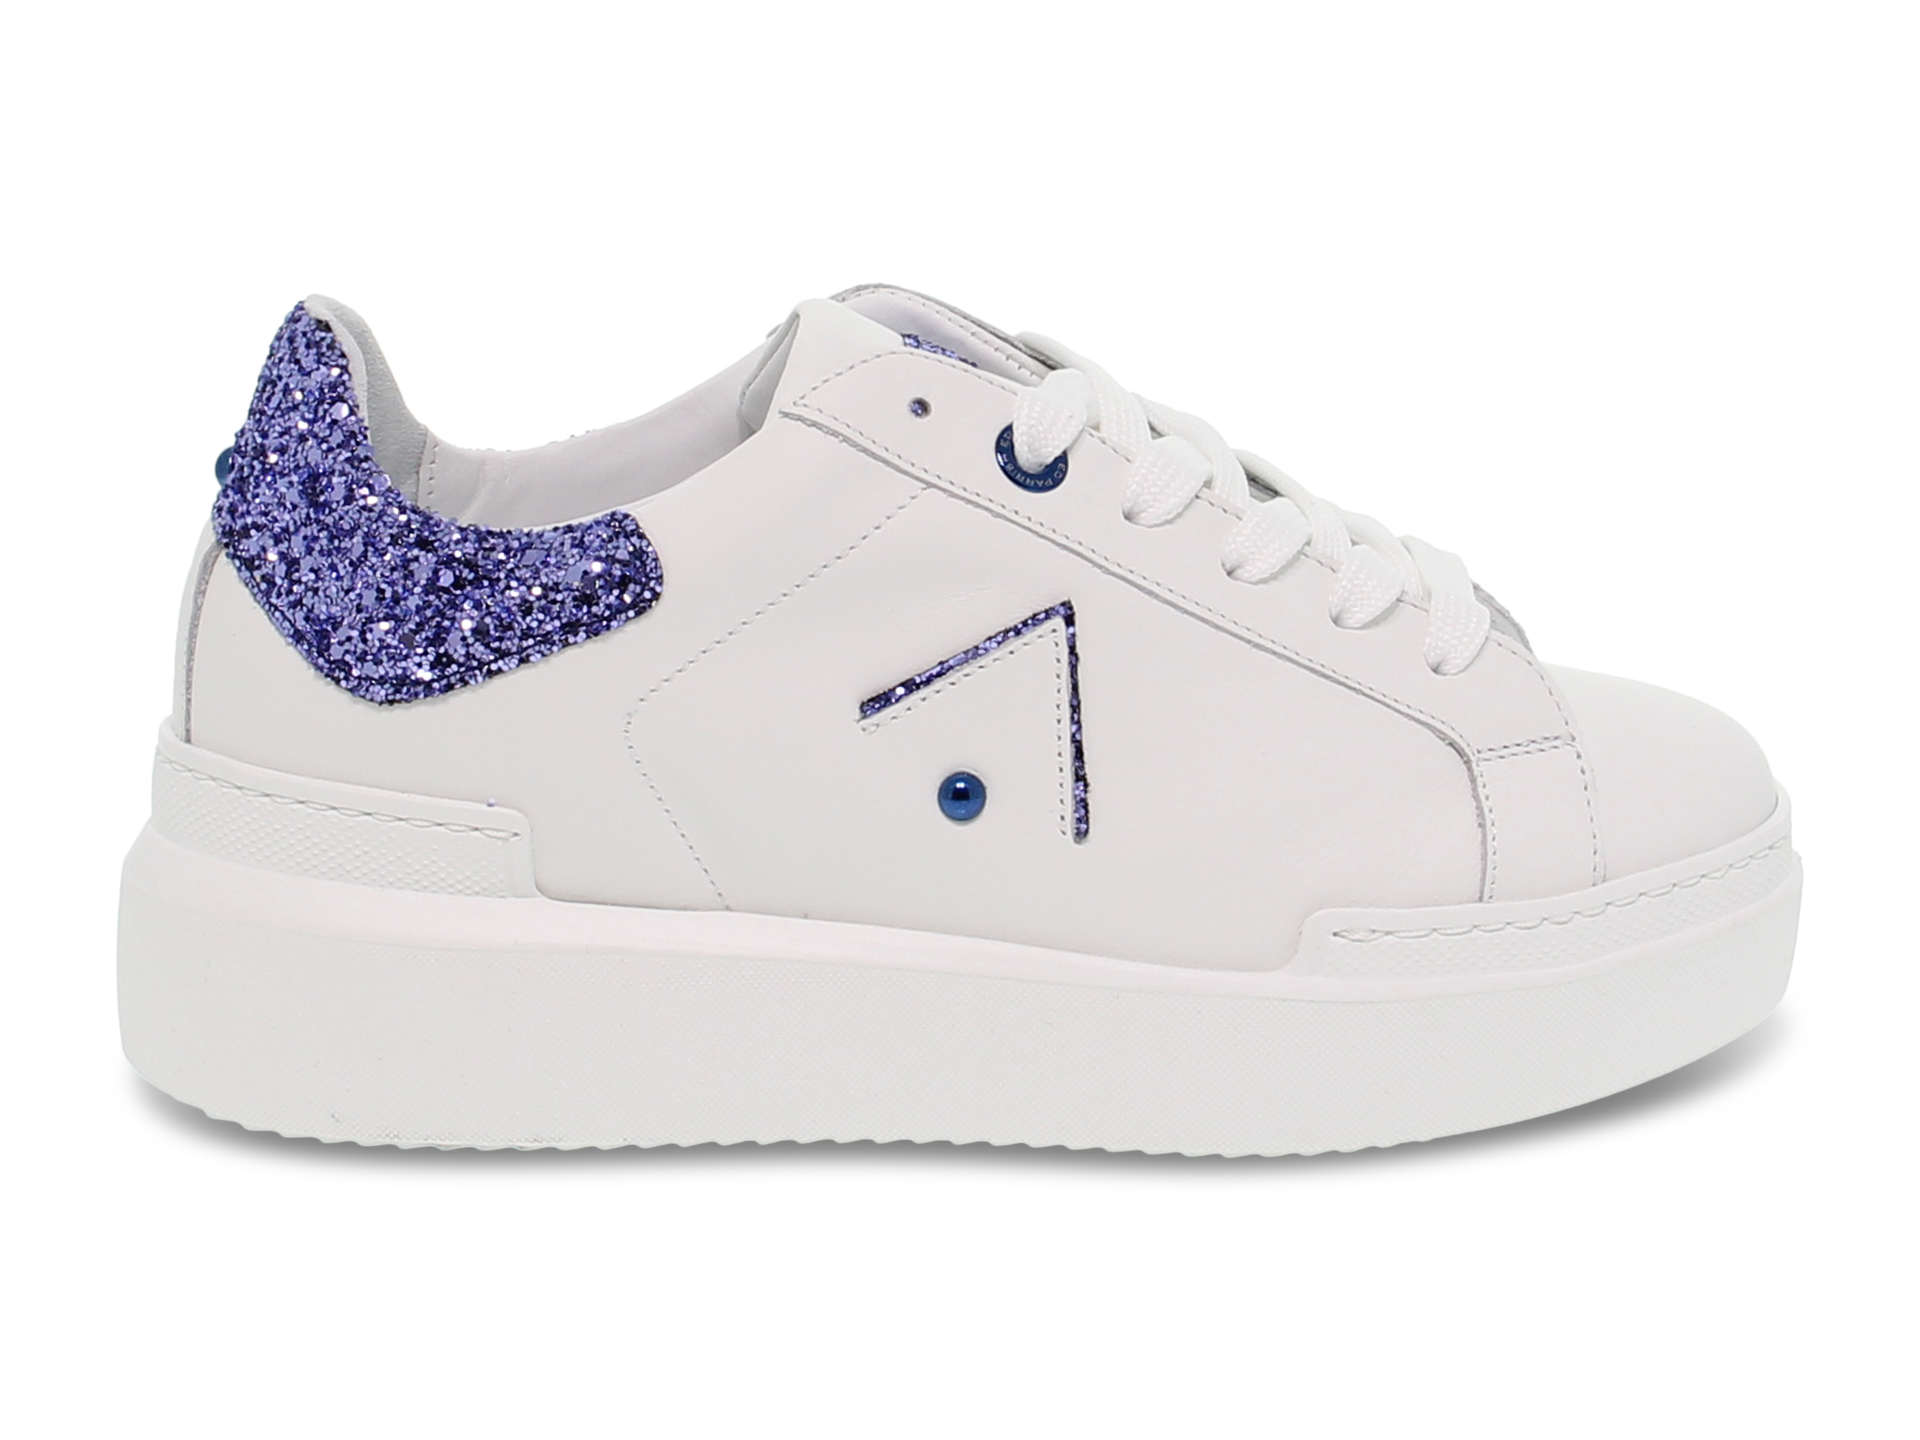 Details about   Sneakers Ed Parrish CKLD SQ45 in white leather Women's Shoes